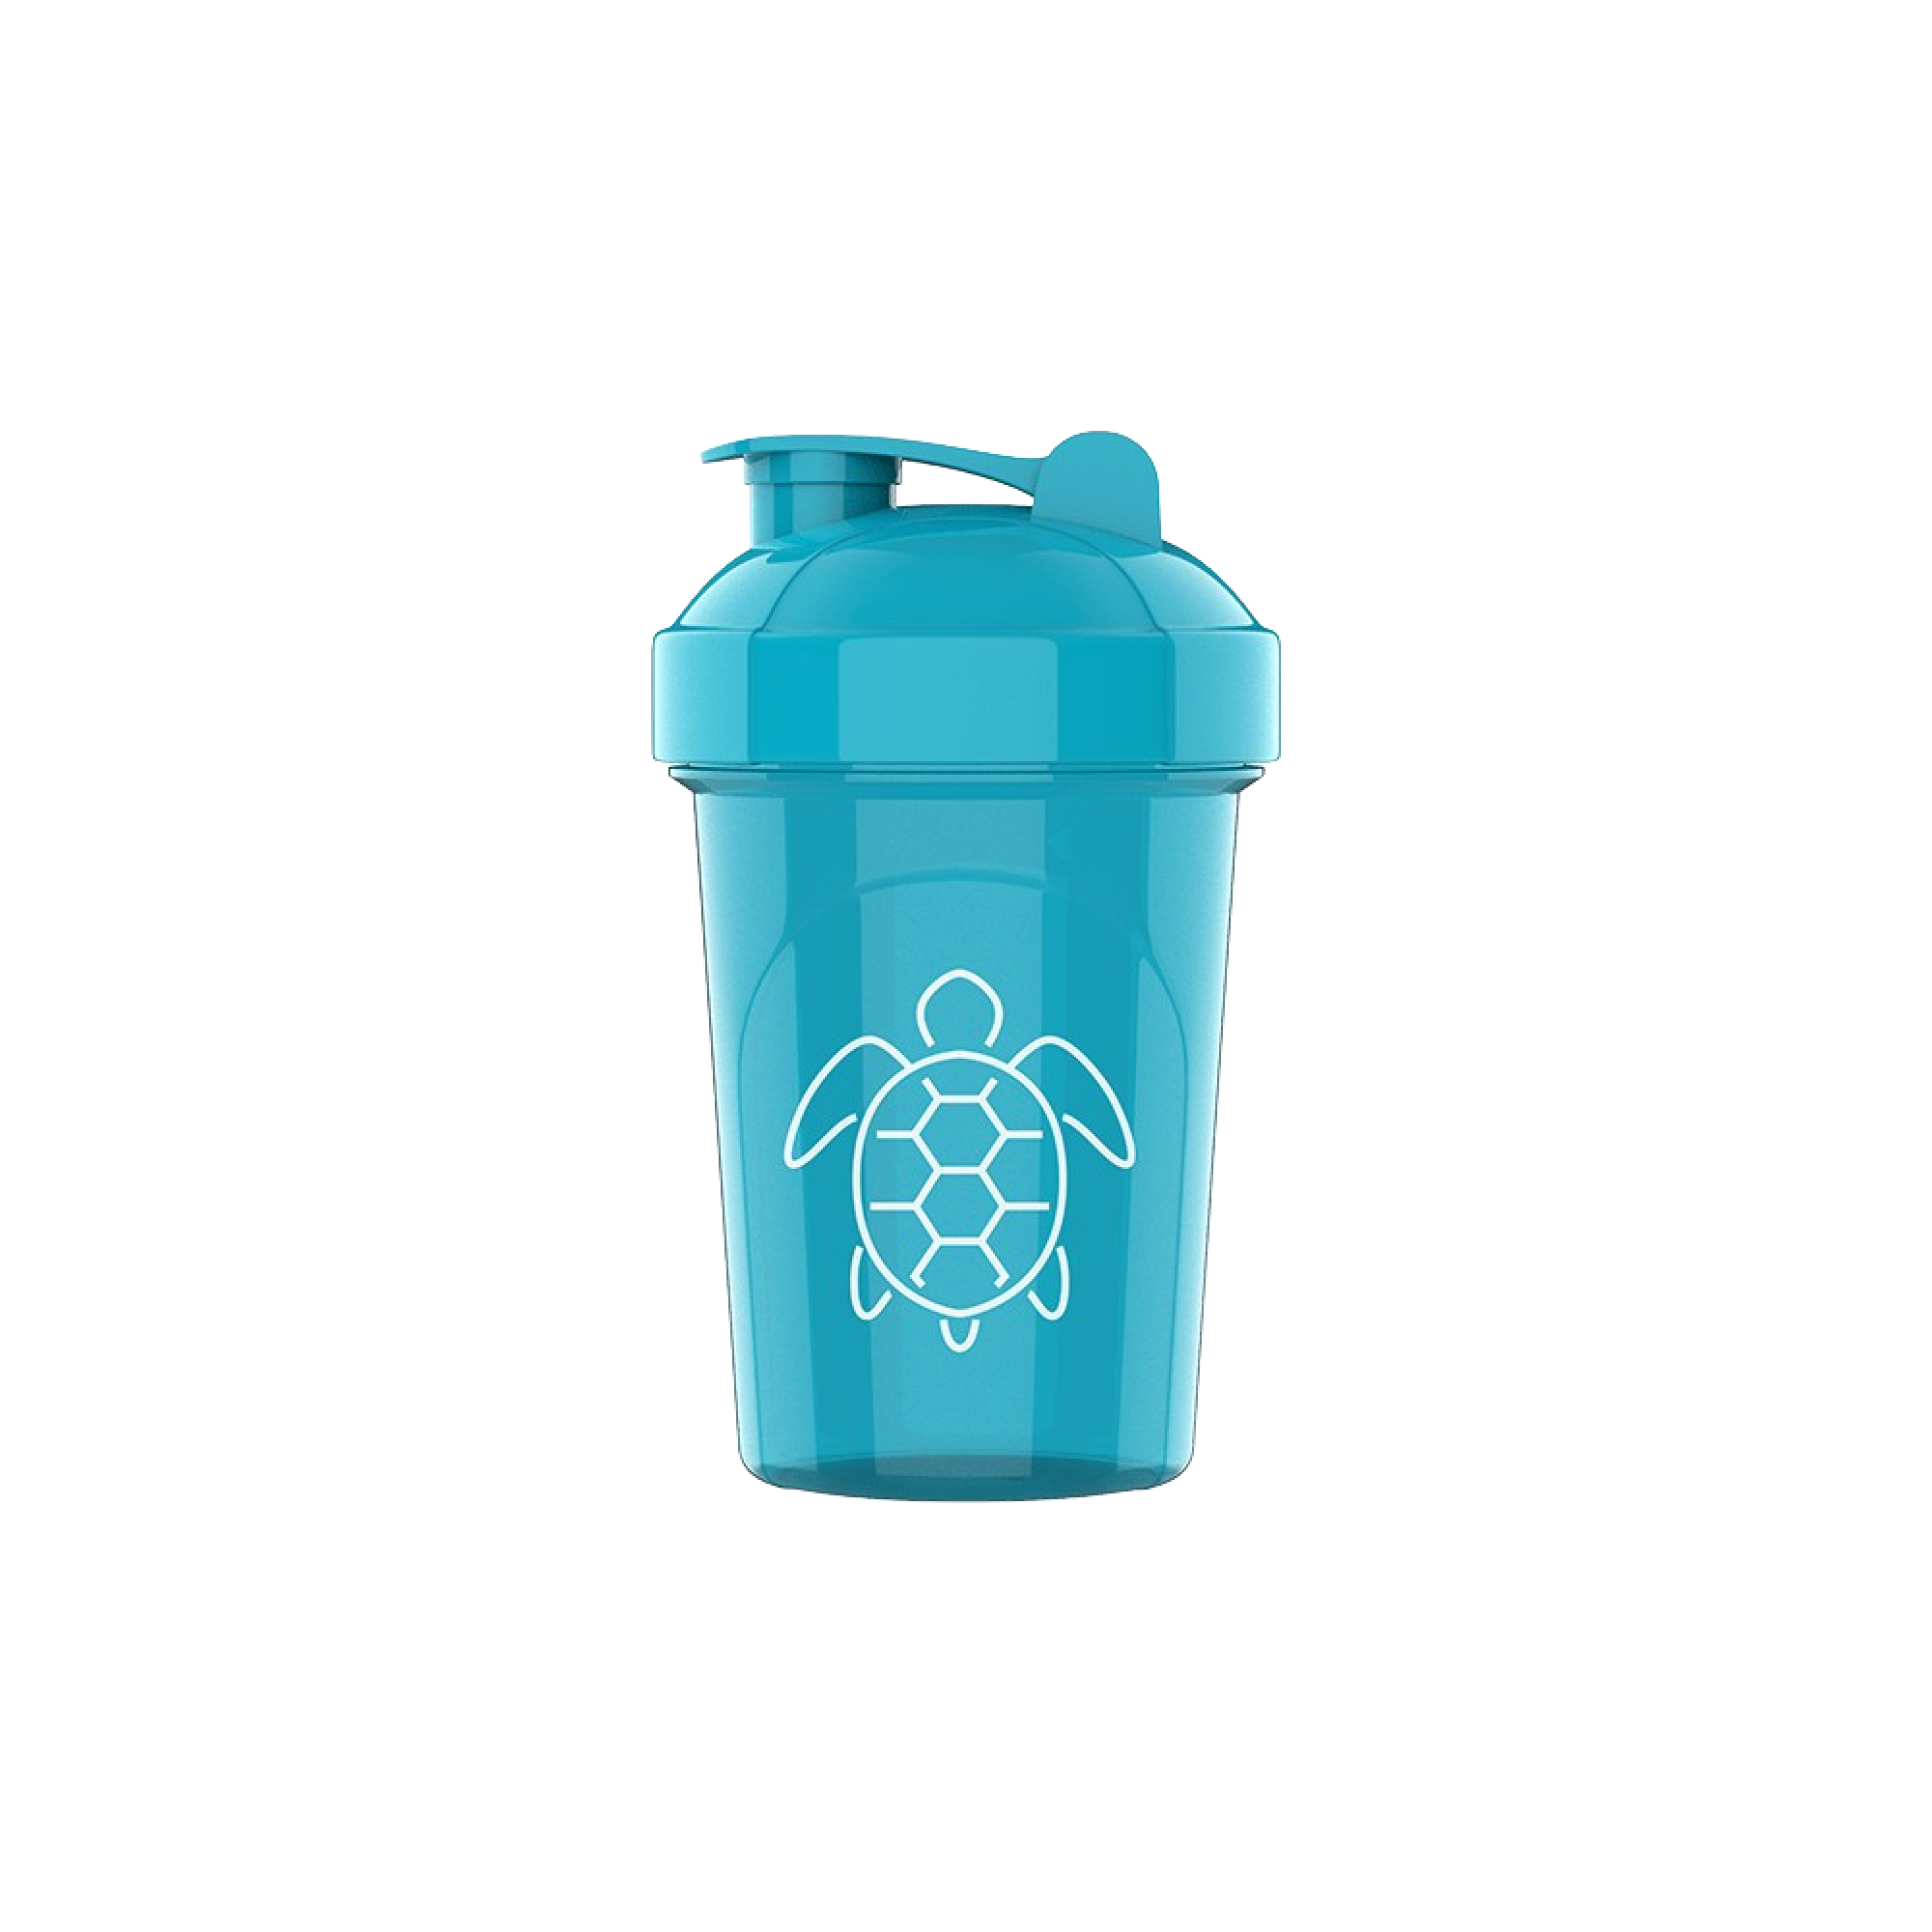 JEELA SPORTS - 2 PACK Protein Shaker Bottles for Protein Mixes